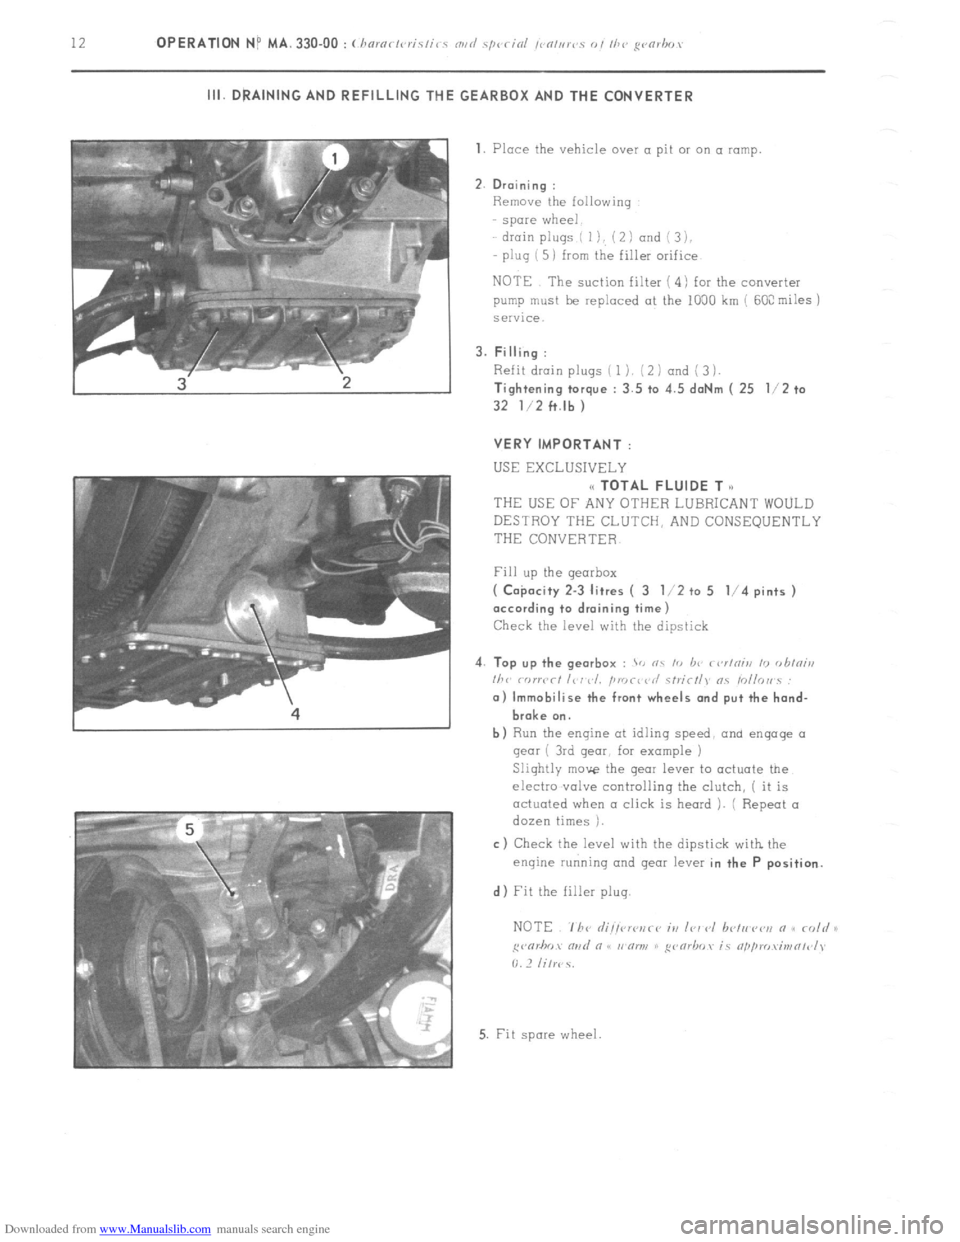 Citroen CX 1983 1.G Workshop Manual Downloaded from www.Manualslib.com manuals search engine 12 OPERATION NP MA. 330.00 : (haro</vr-is/i< c m,</ s/wcinl ,cn,i,rt~. o, I/>? gvmhr,, III. DRAINING AND REFILLING THE GEARBOX AND THE CONVERTE